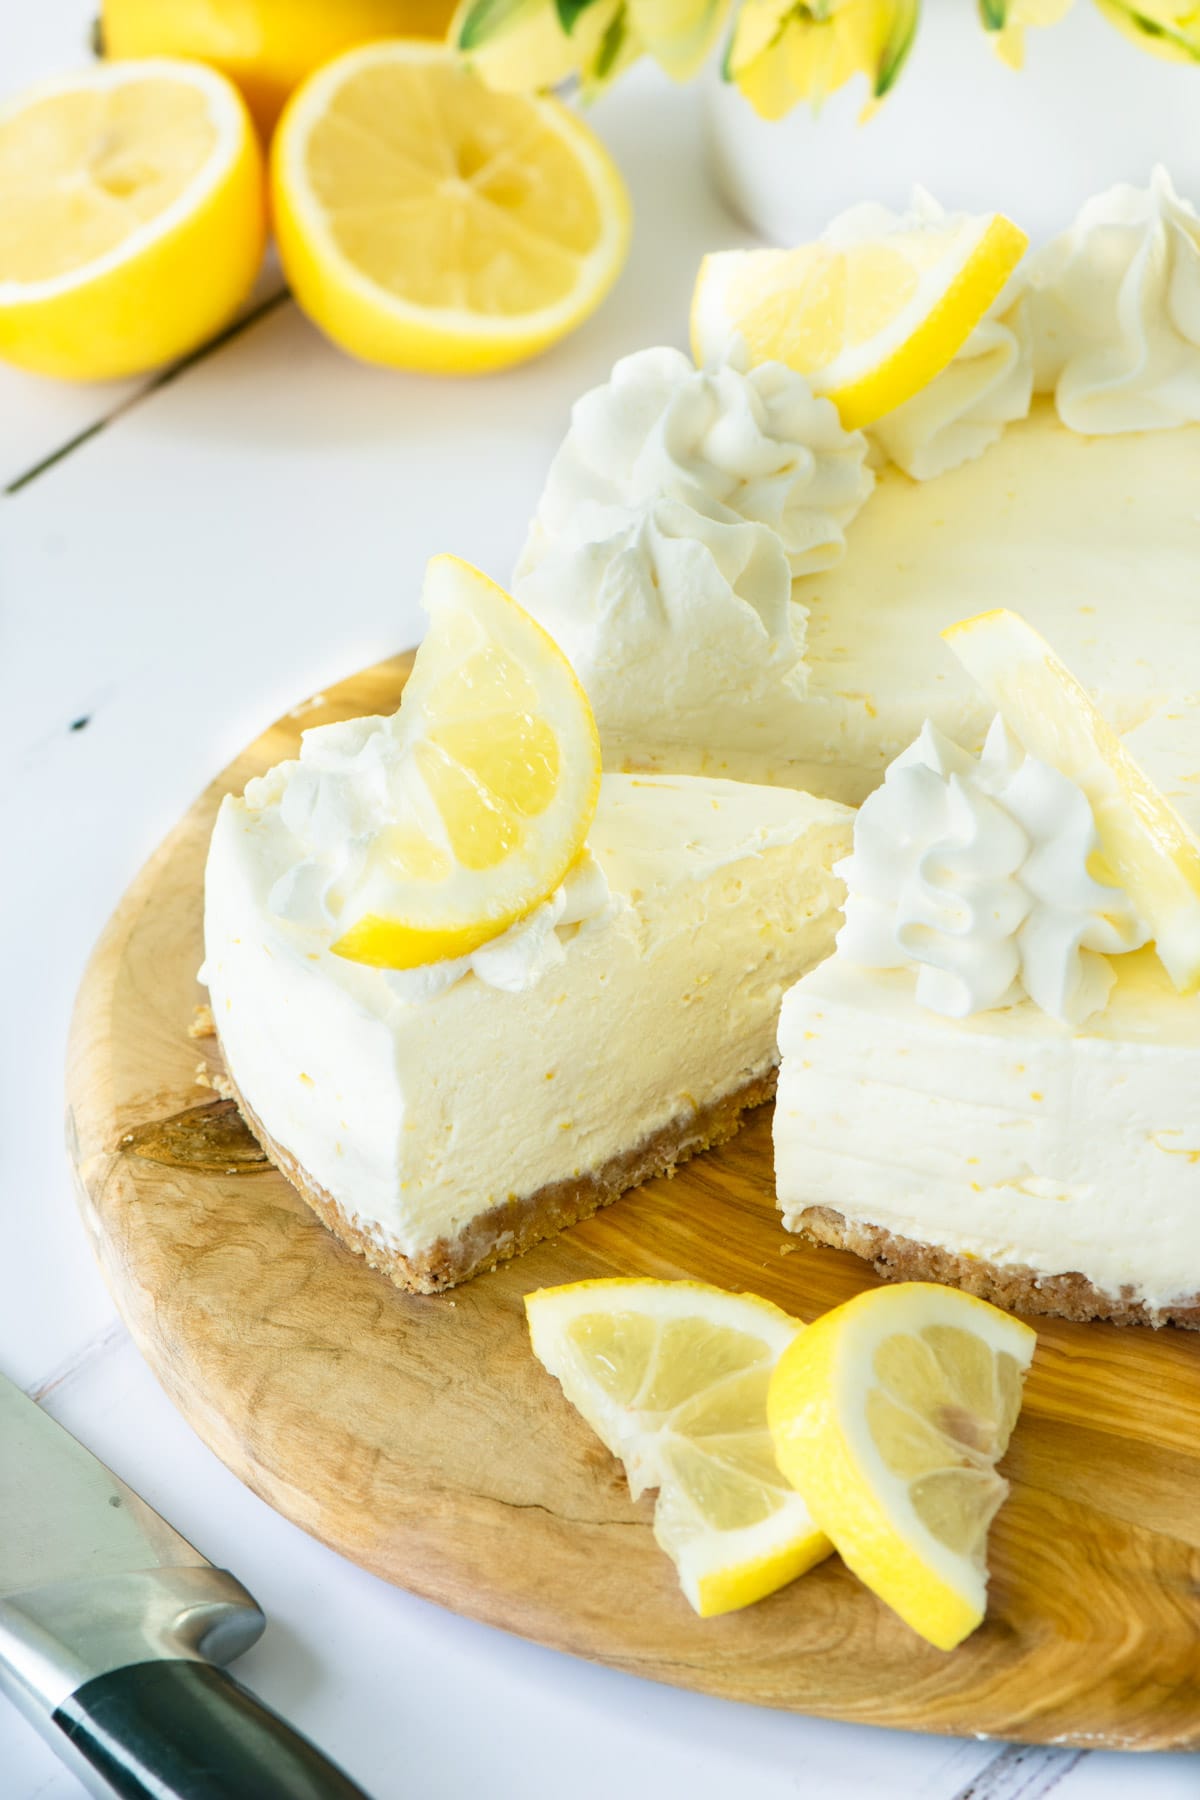 A no-bake lemon cheesecake with a slice cut out.